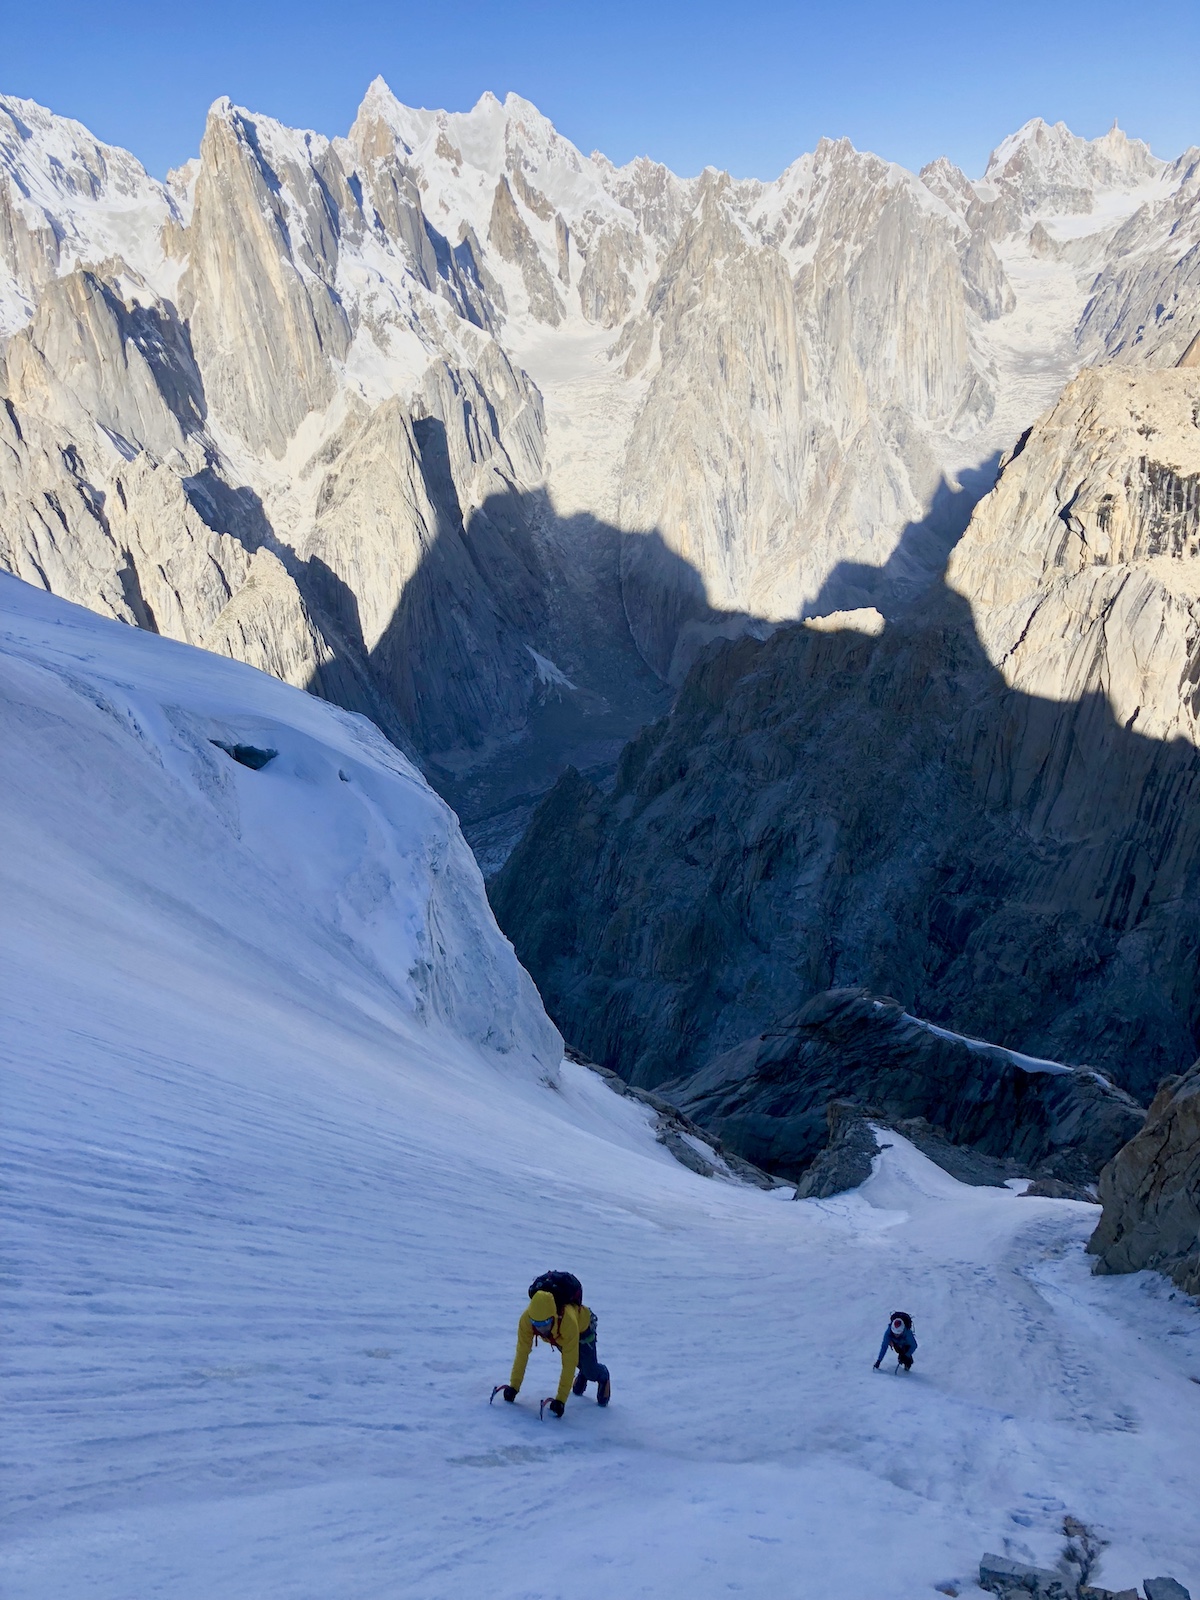 Allfrey and Pfaff at the start of the ice difficulties on the American Route on the north side of Great Trango Tower. [Photo] Andres Marin